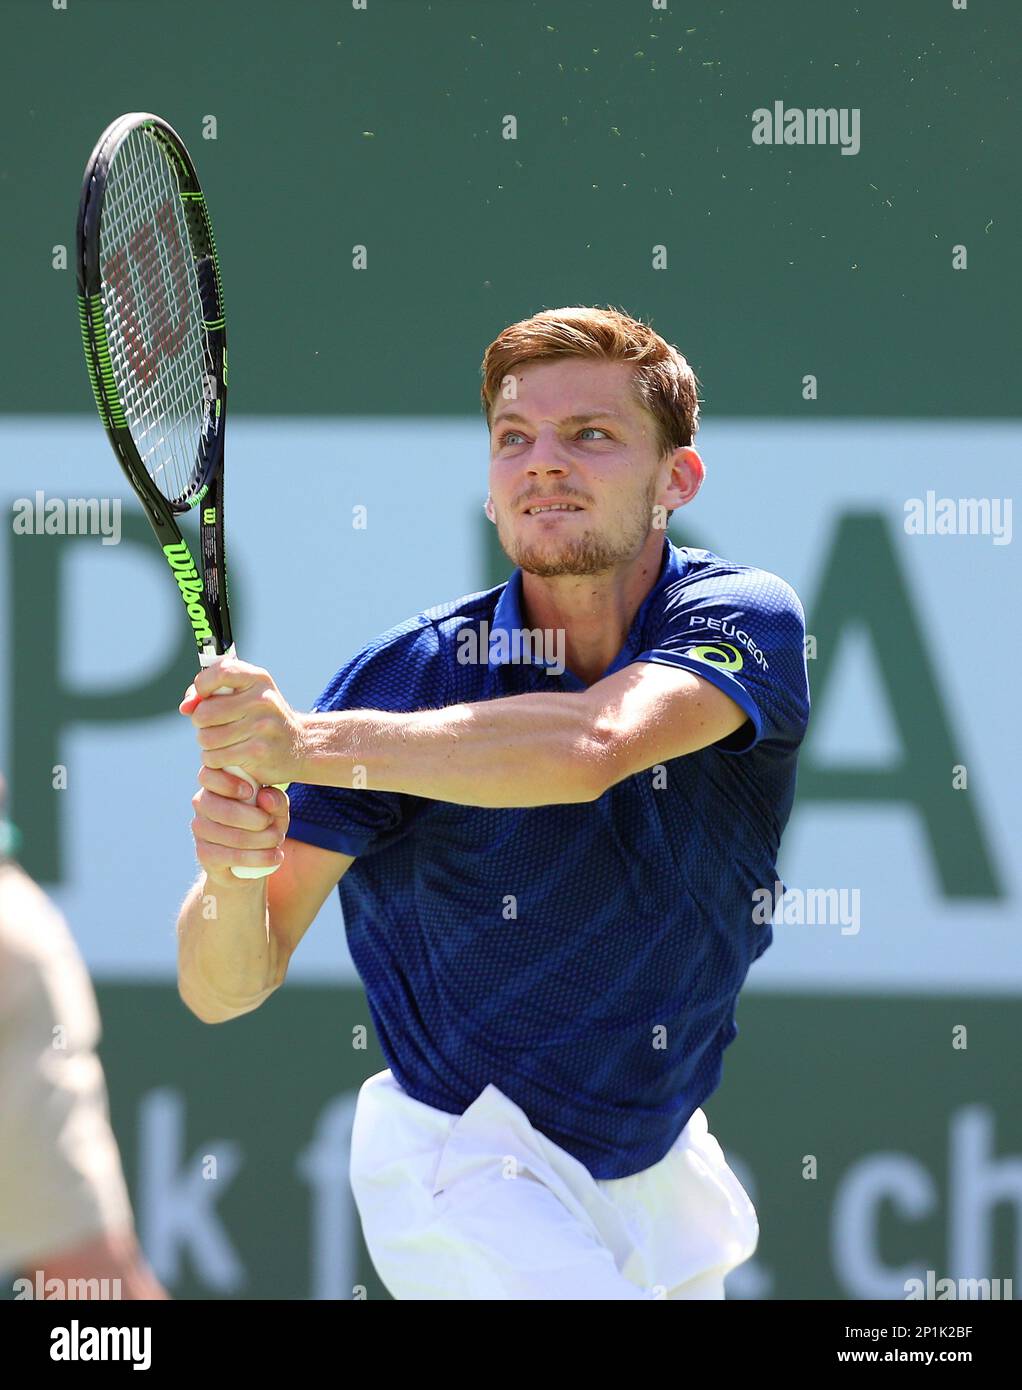 March 19, 2016 David Goffin of Belgium in action against Milos Raonic of Canada in the semi finals of the 2016 BNP Paribas Open at Indian Wells Tennis Garden in Indian Wells,